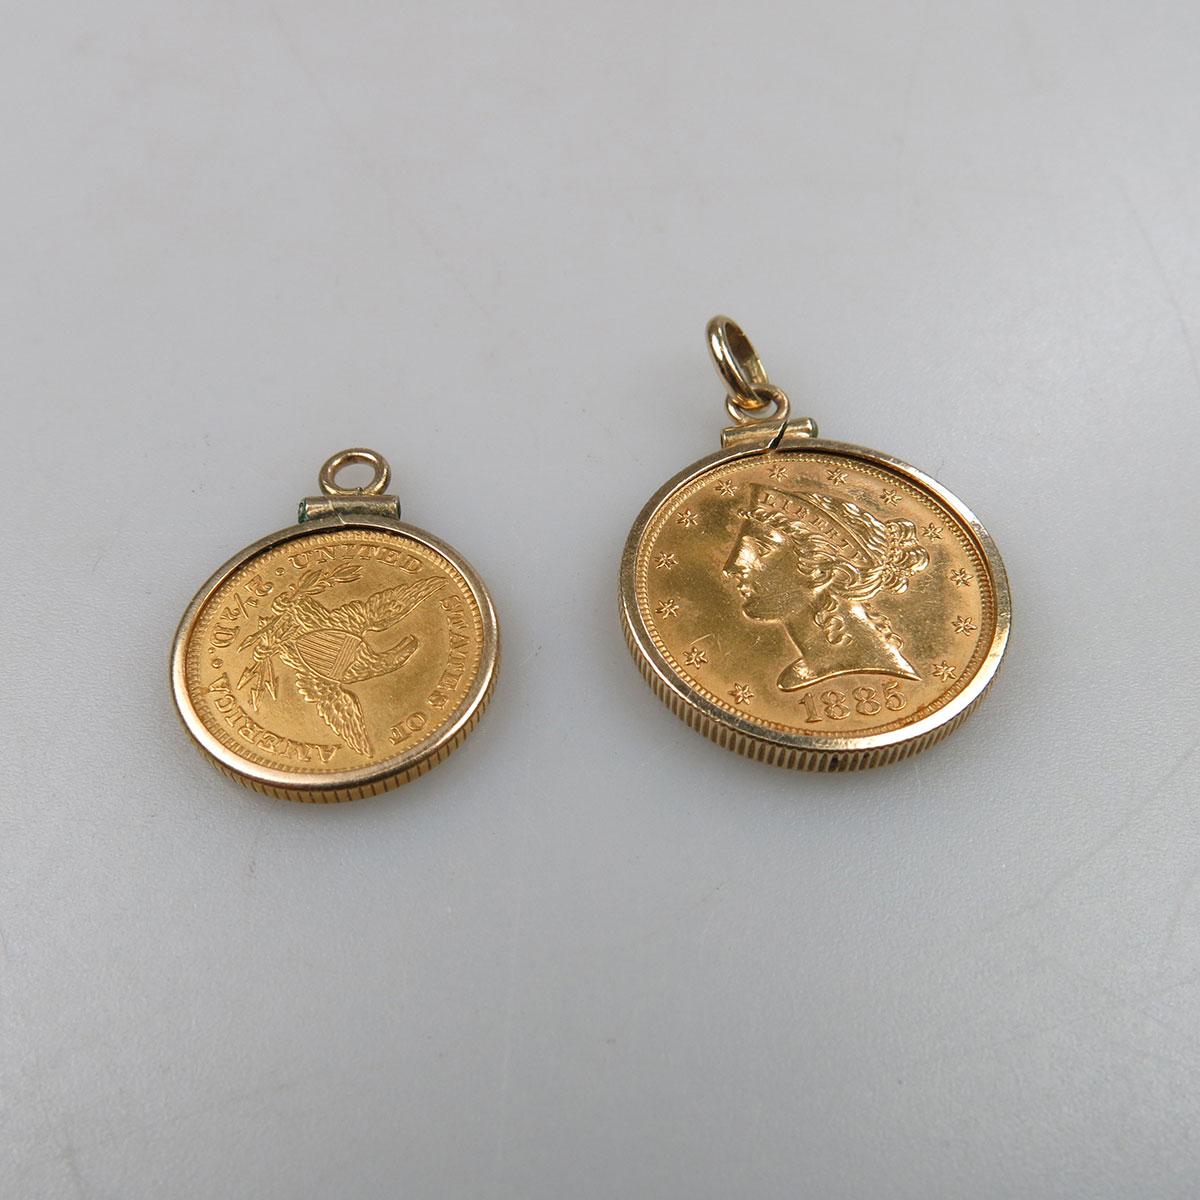 American $5 Gold Coin (1885) & an American $2 1/2 Gold Coin (1889)